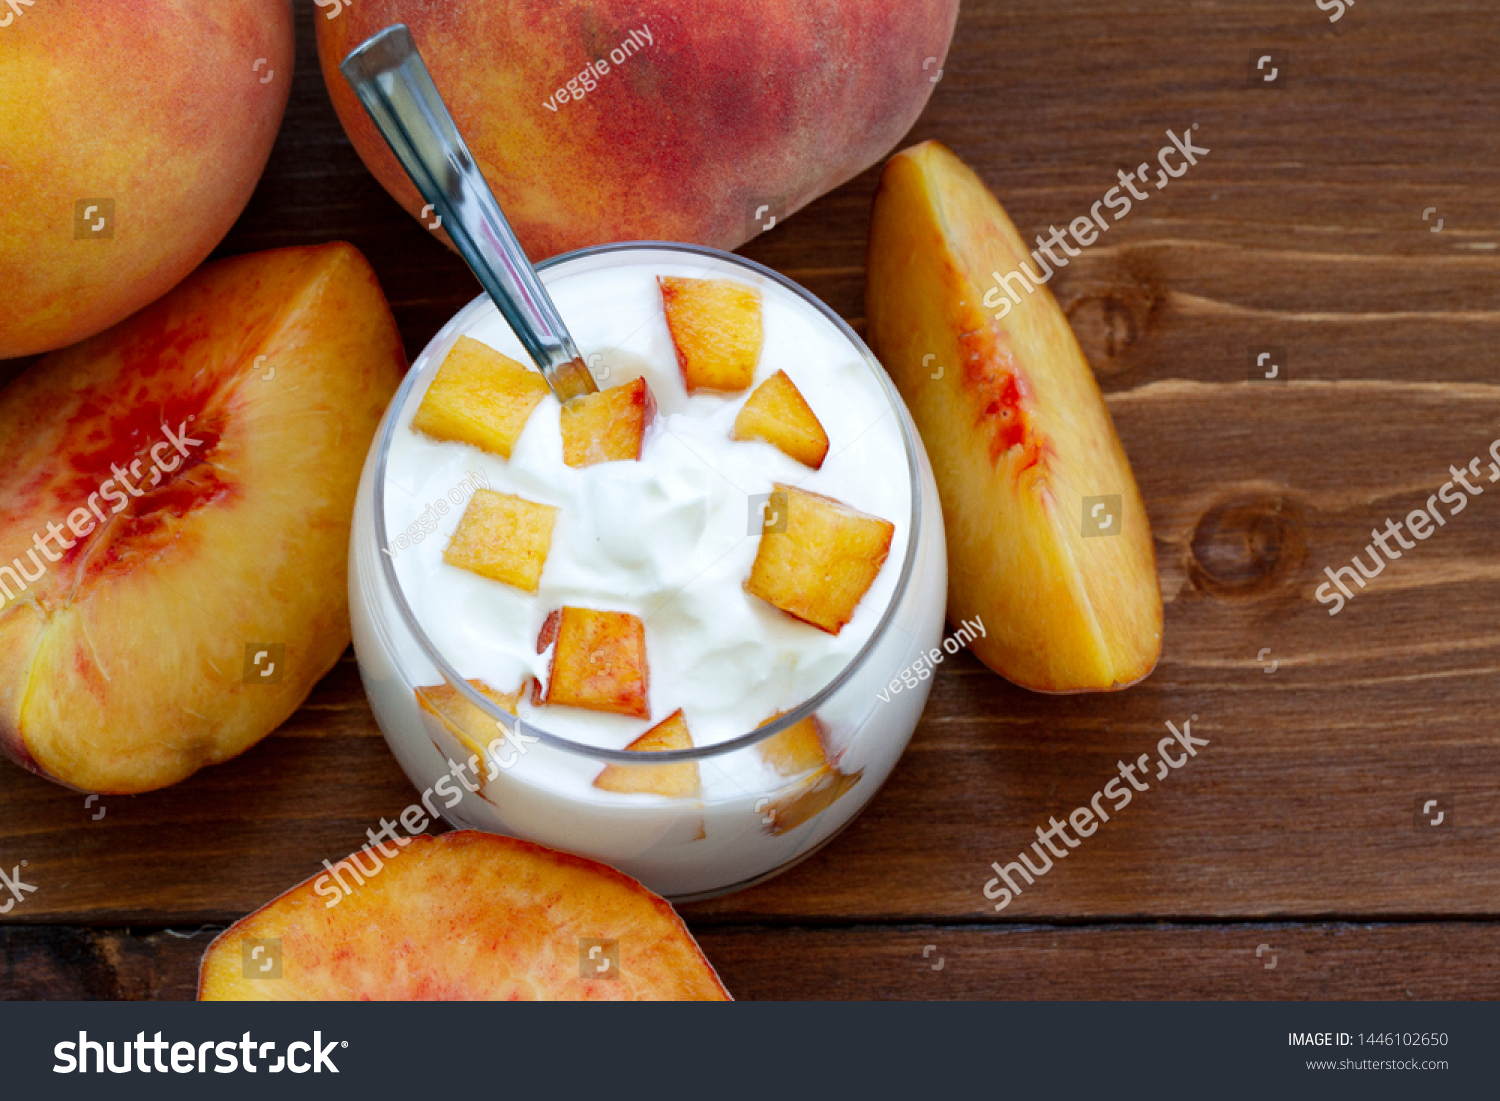 peach yogurt, sweet summer dessert. Curd dessert with fresh fruits. Eating healthy, vitamin-rich Breakfast. yogurt with slices of fresh peaches and whole peaches on a wooden background. close up. #1446102650